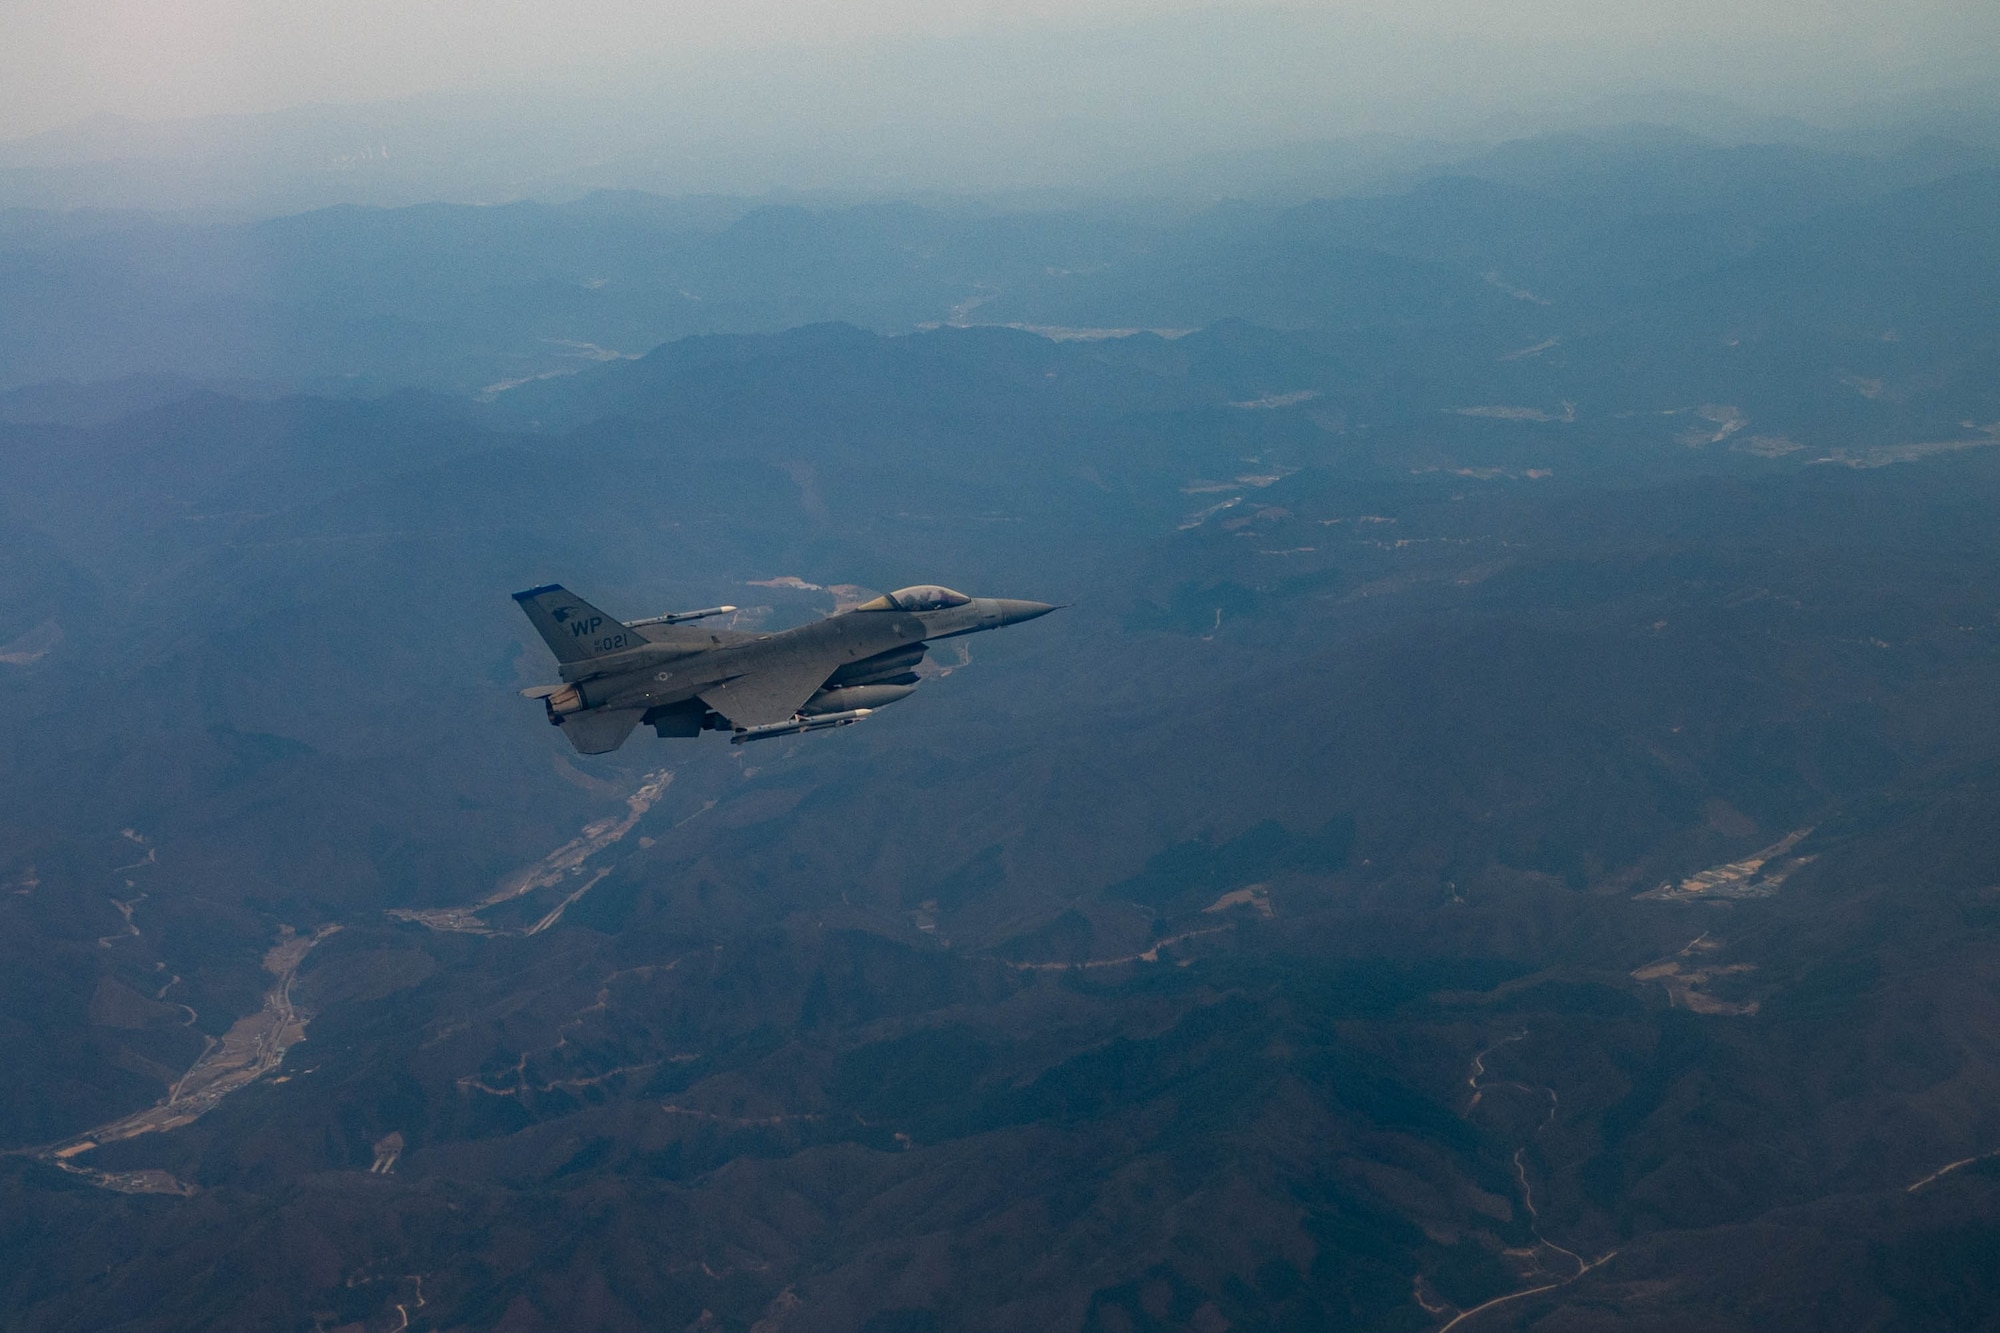 An F-16 Fighting Falcon assigned to the 8th Fighter Wing, Kunsan Air Base, Republic of Korea, flies over the Korean Peninsula, April 4, 2023. The F-16 entered the U.S Air Force inventory in 1979 and since has undergone a number of modernization efforts; most recently the Air Force Life Cycle Management Center began providing F-16s Post Block Integration Team (PoBIT) upgrades. PoBIT combines 22 various upgrades to the F-16’s avionics, improving the weapon systems lethality. (U.S. Air Force photo by Captain Kaylin P. Hankerson)